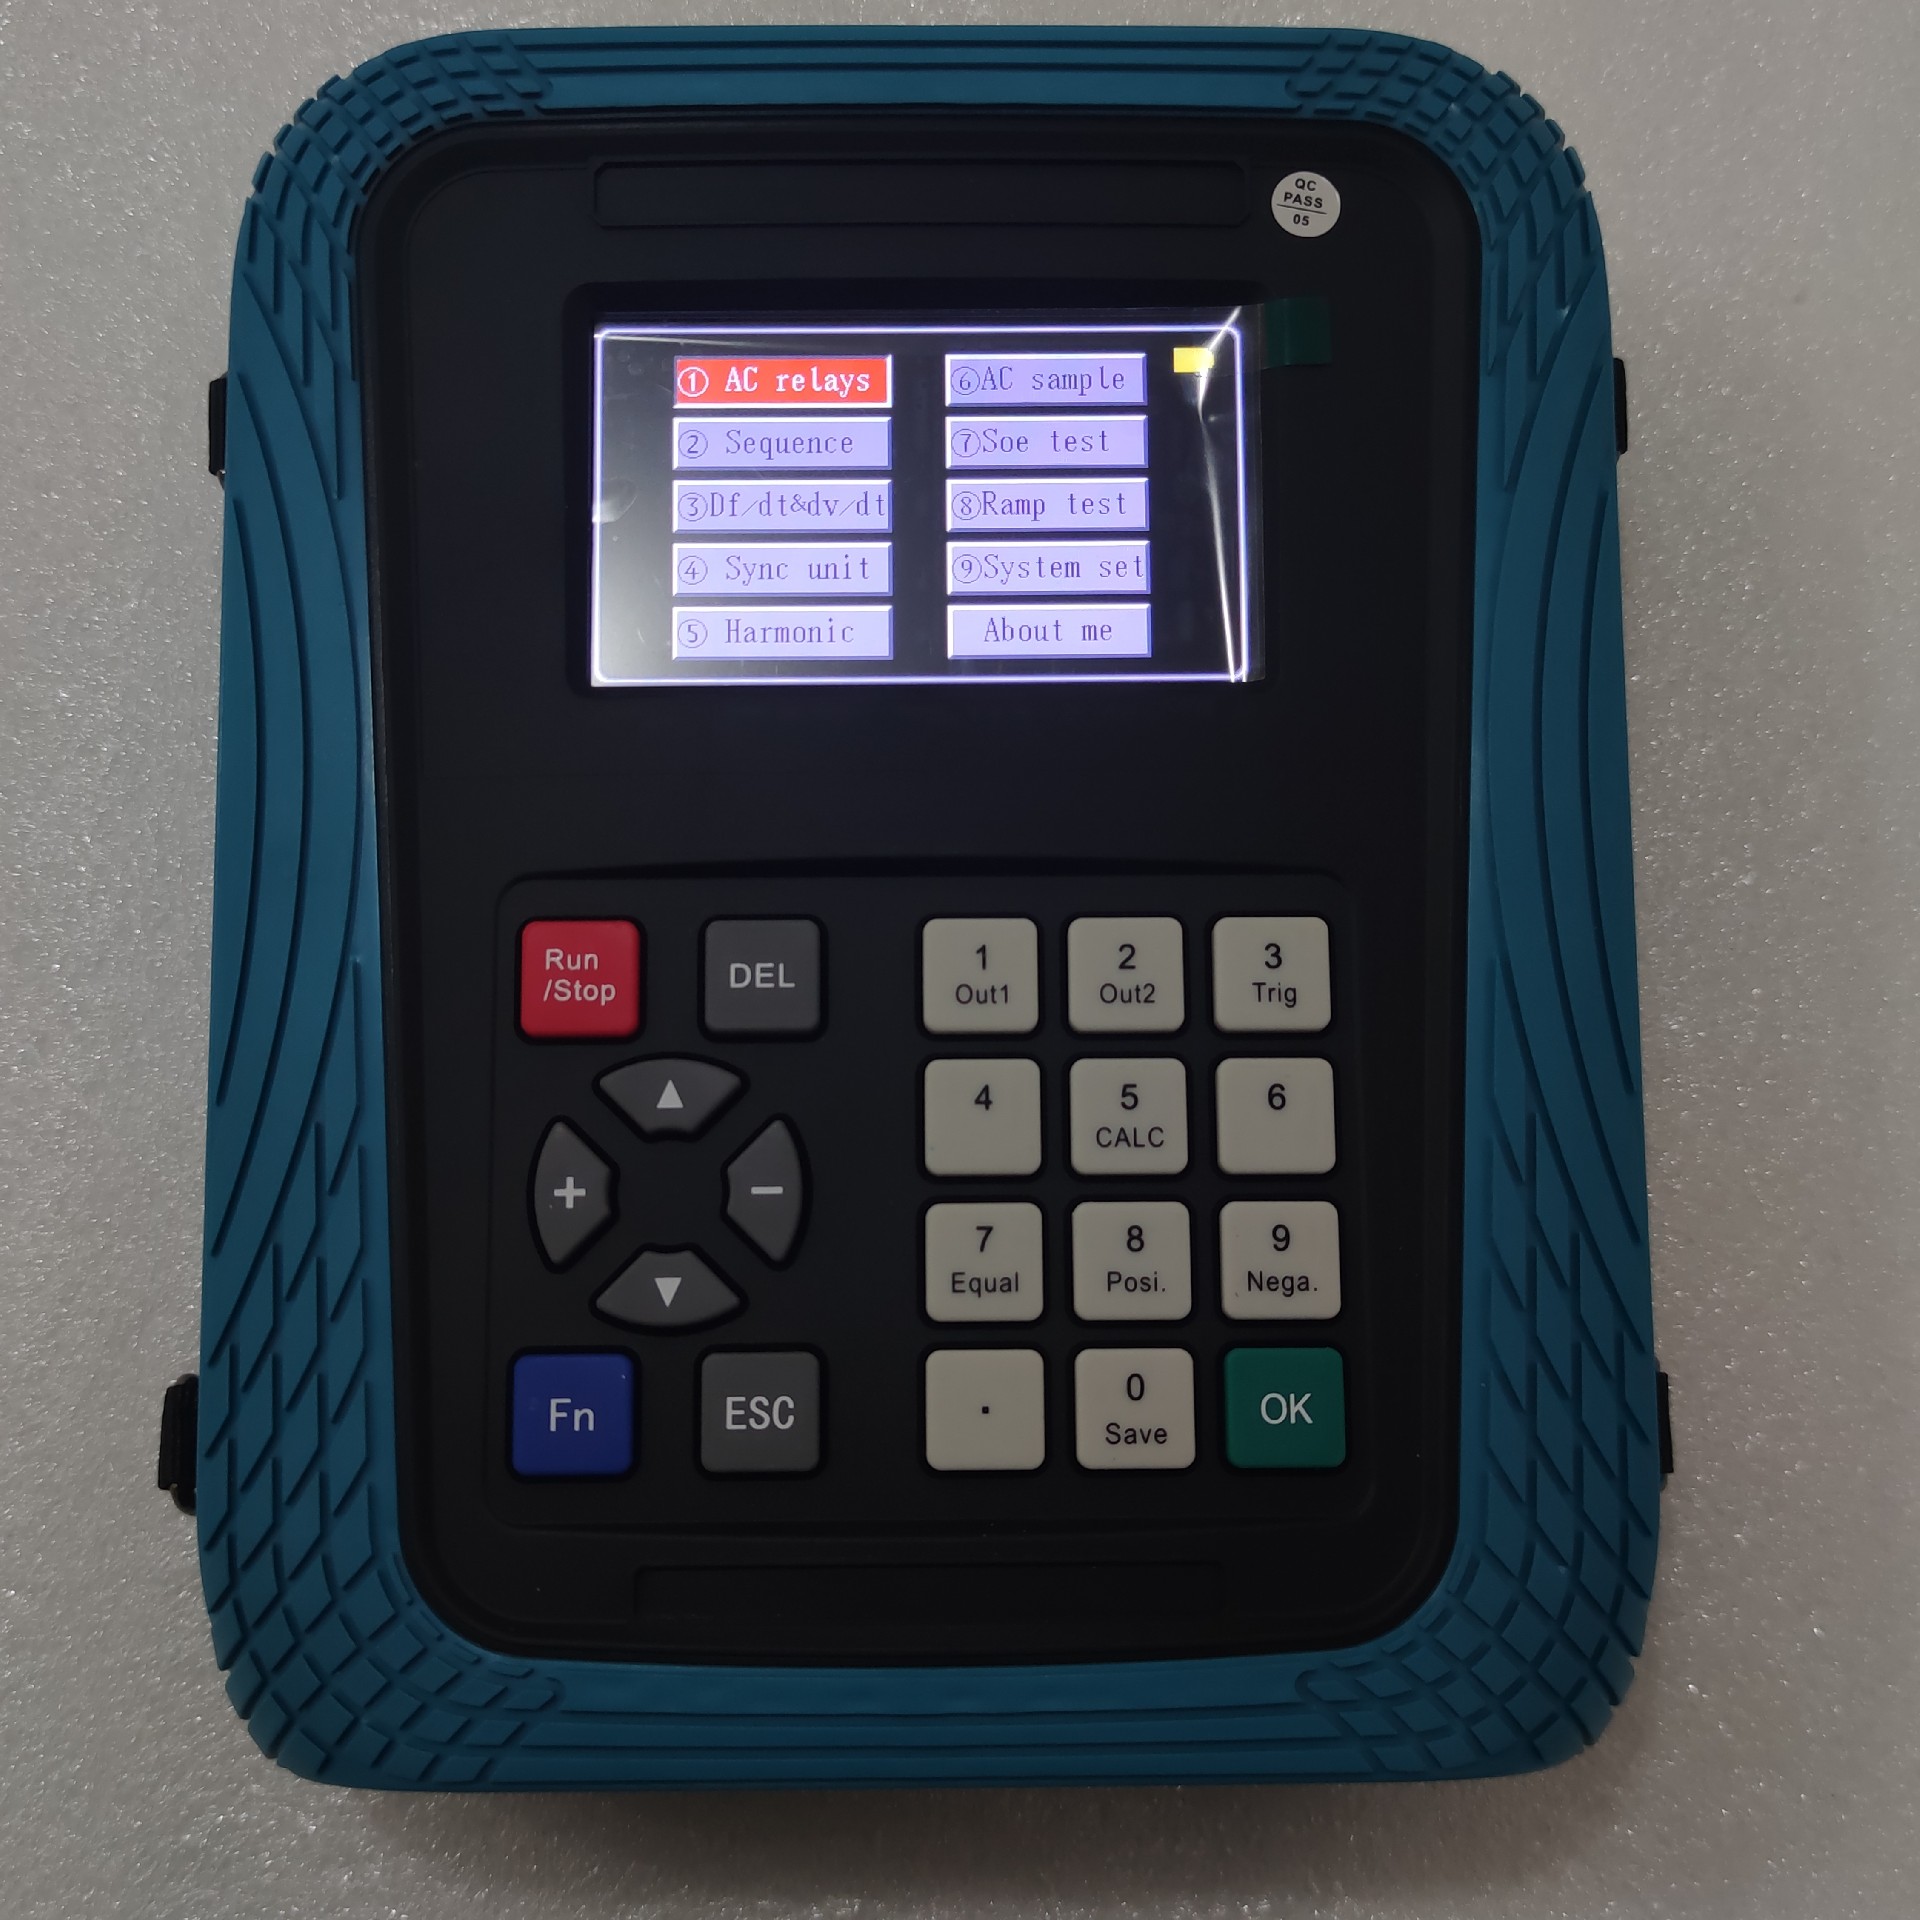 HZJB-1700 Hand-held Three-phase Relay Protection Tester